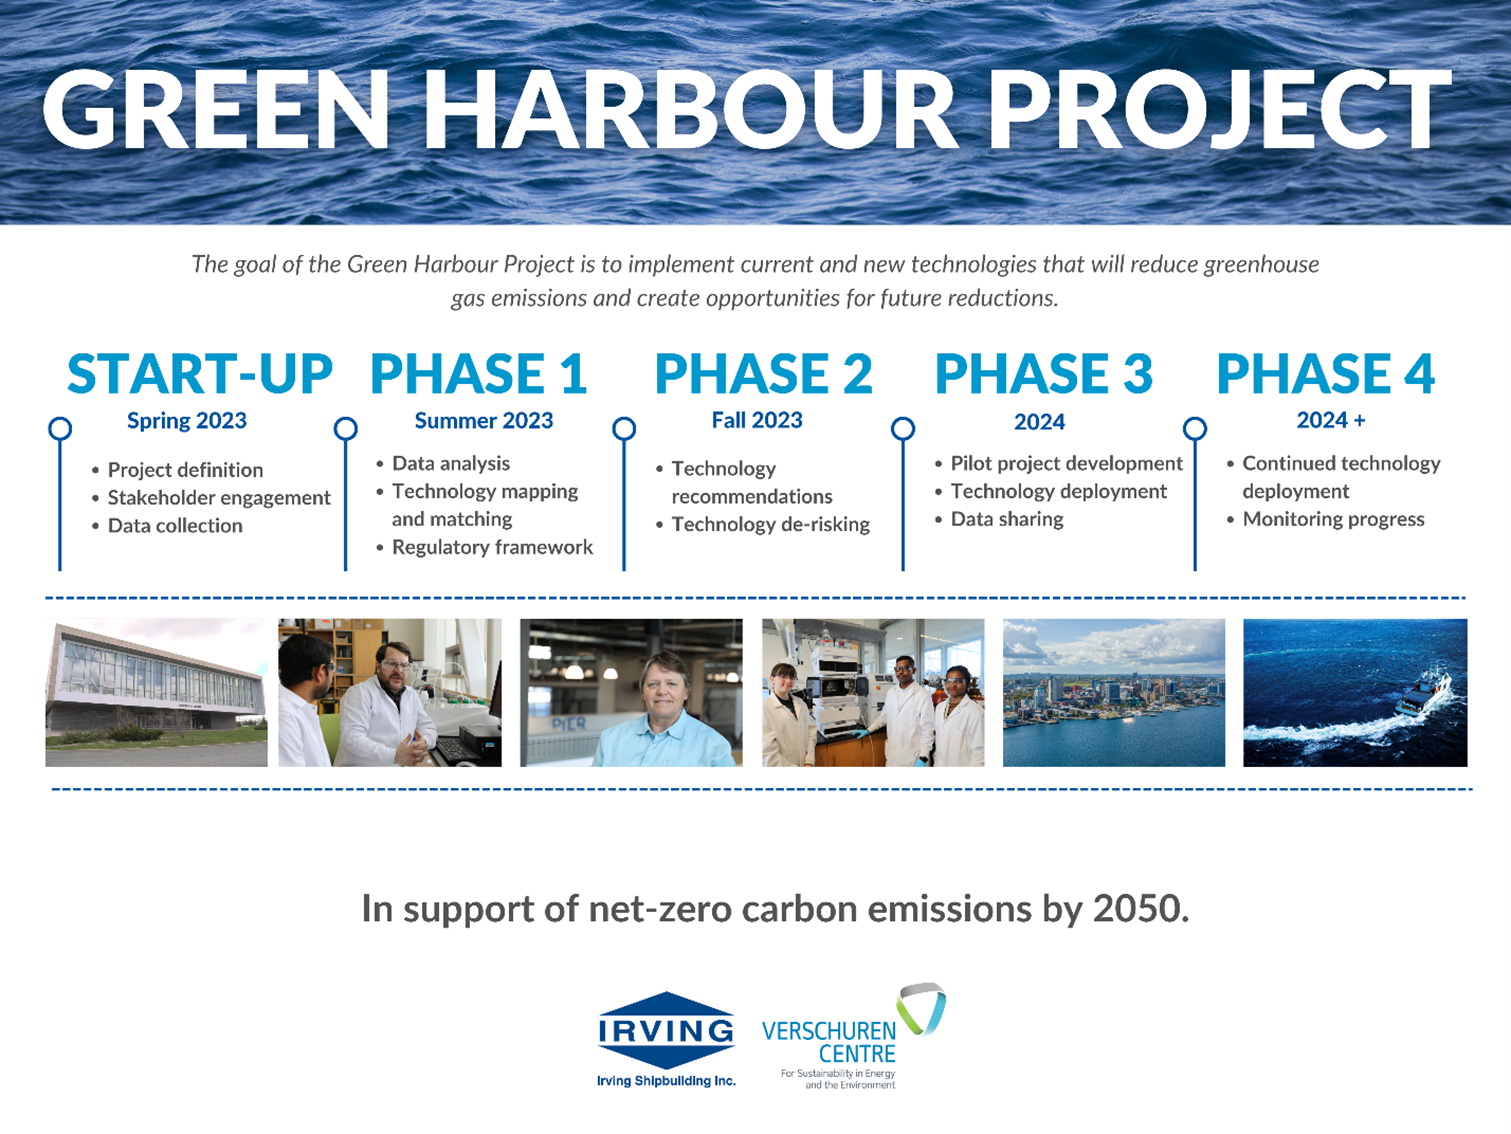 The goal of the Green Harbour Project is to implement current and new technologies that will reduce greenhouse gas emissions and gas emissions and create opportunities for future reductions.